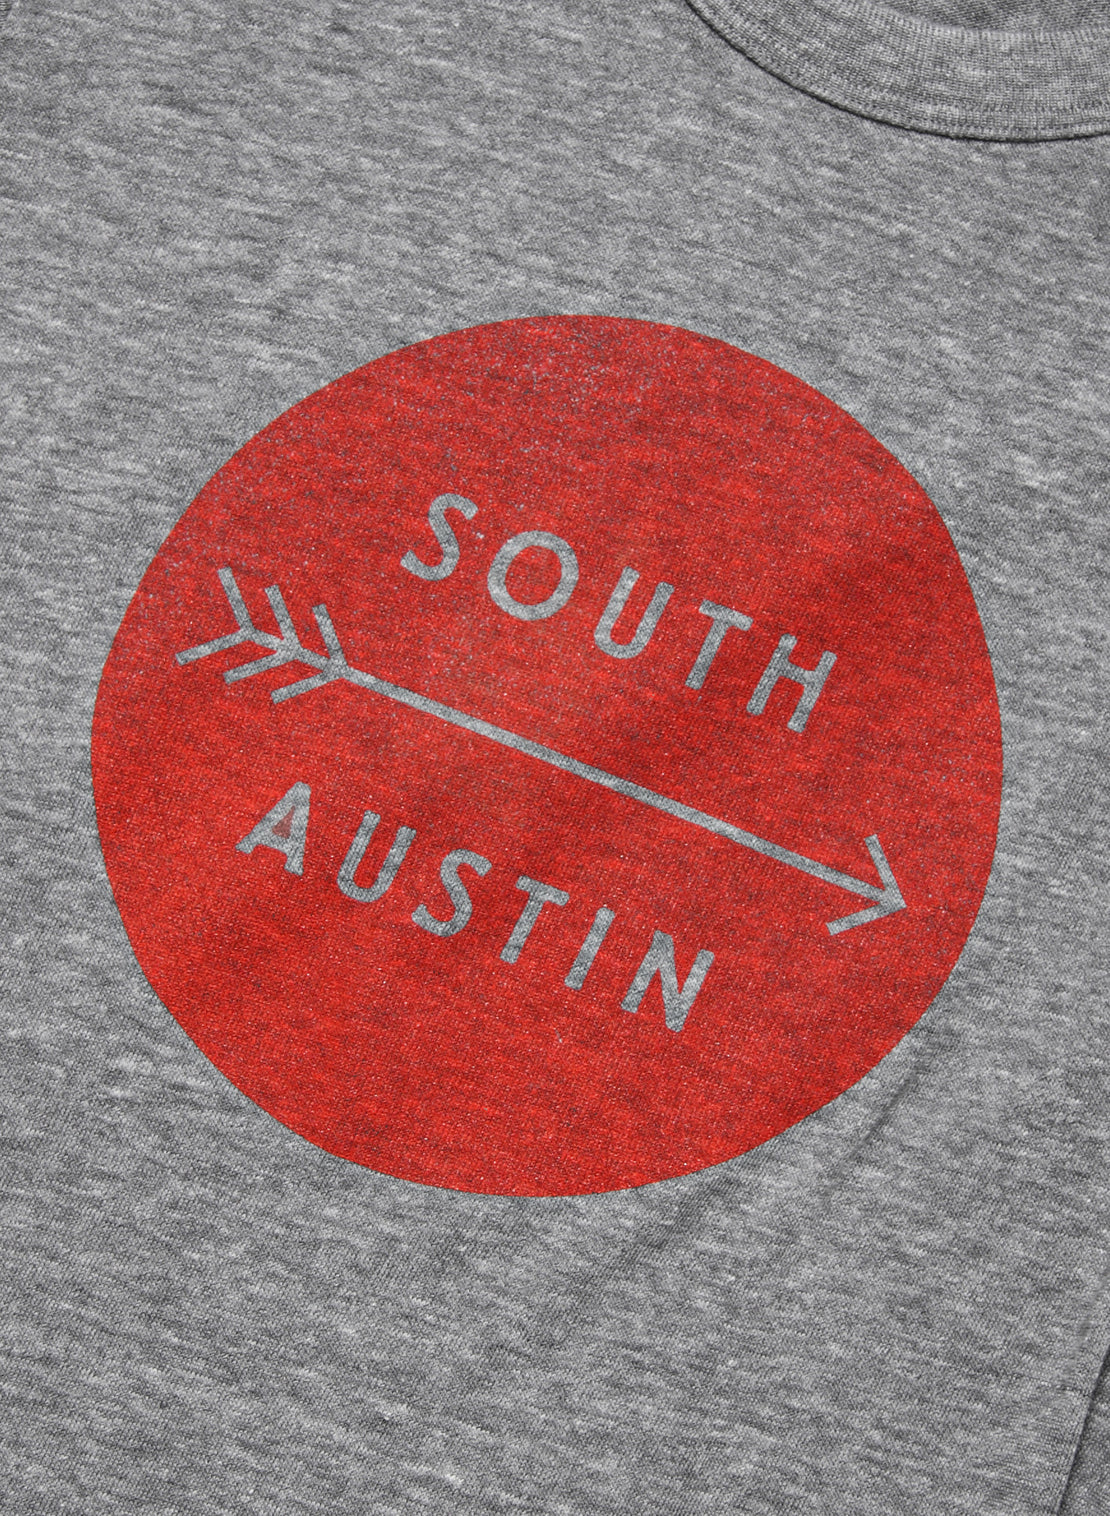 Graphic Tee - South Austin - Alchemy Design - STAG Provisions - Tops - Graphic Tee